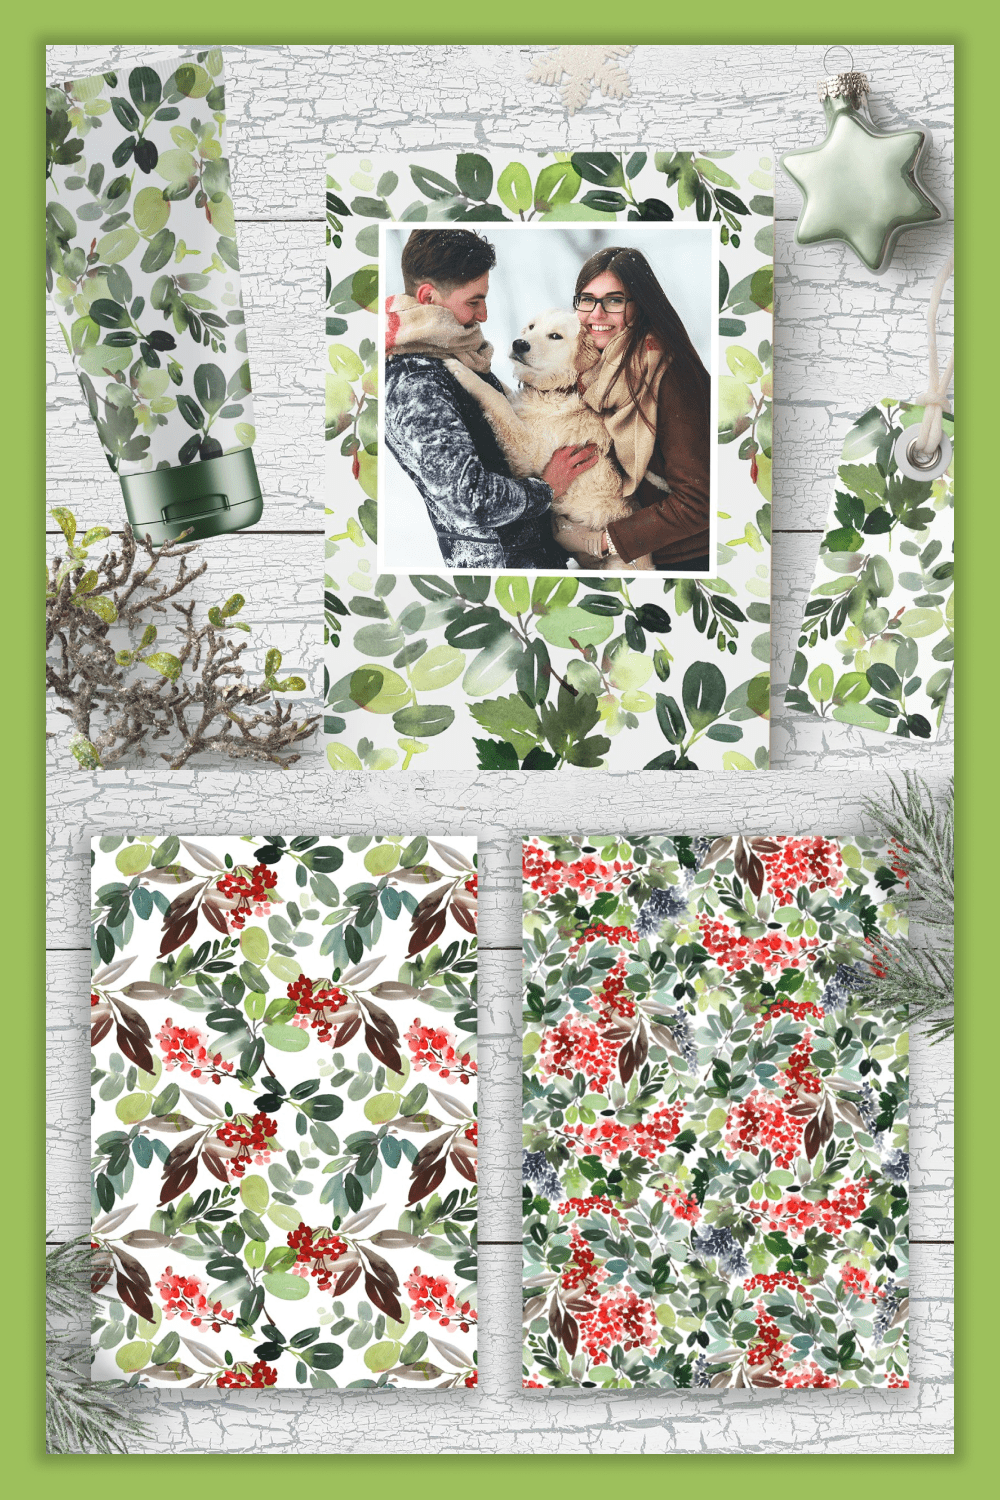 Collage with drawn intertwined twigs with red berries on the covers.